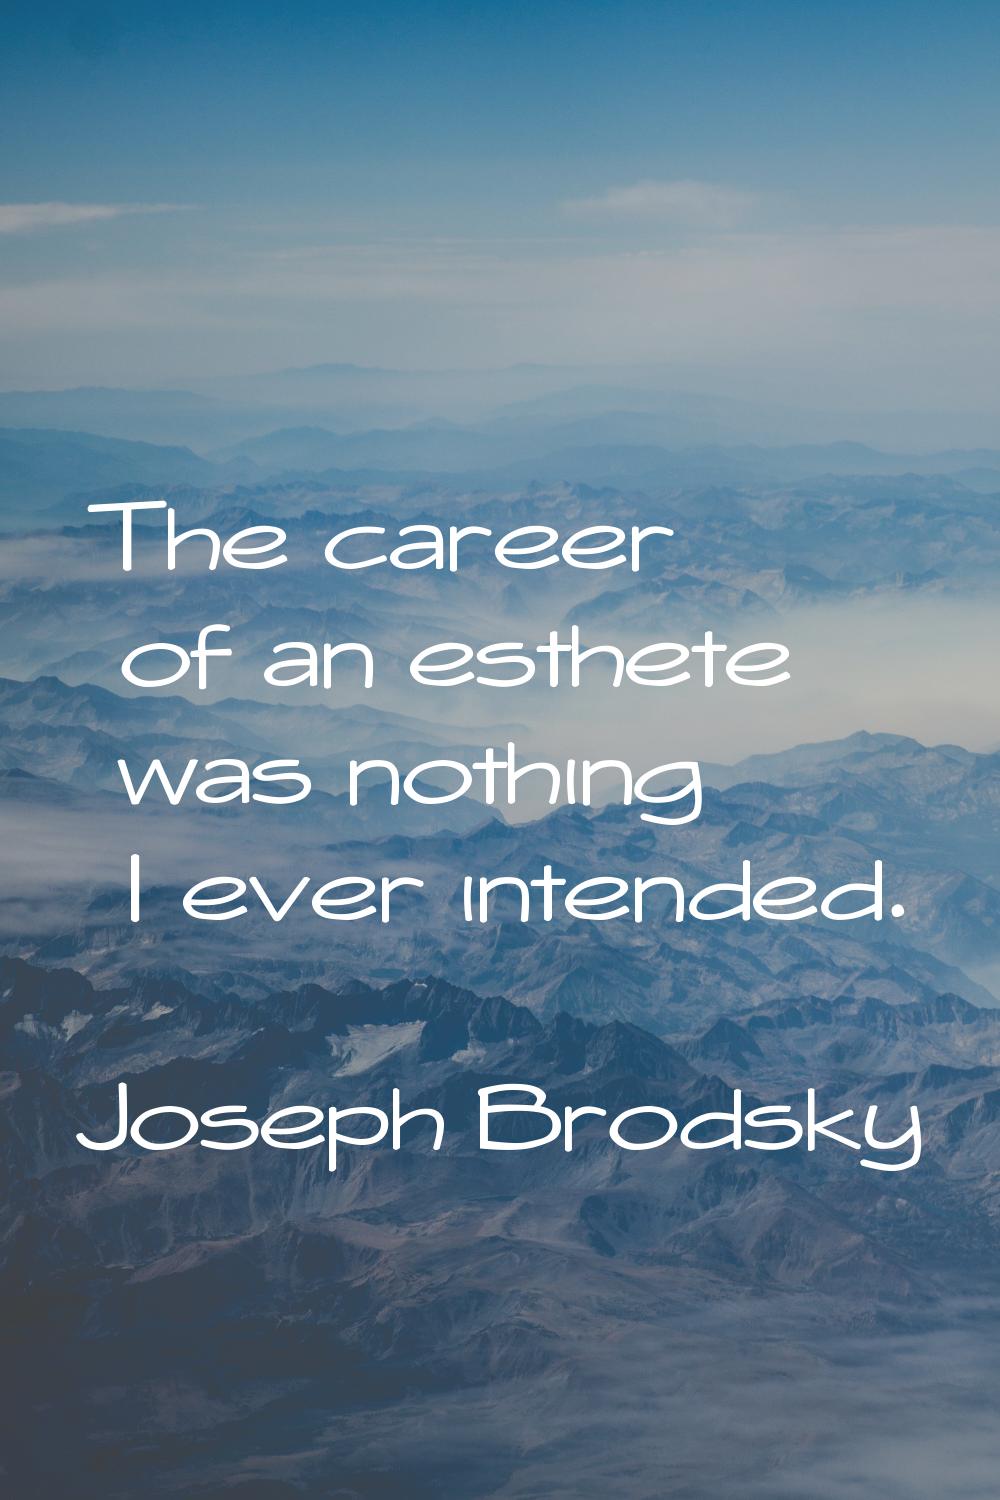 The career of an esthete was nothing I ever intended.